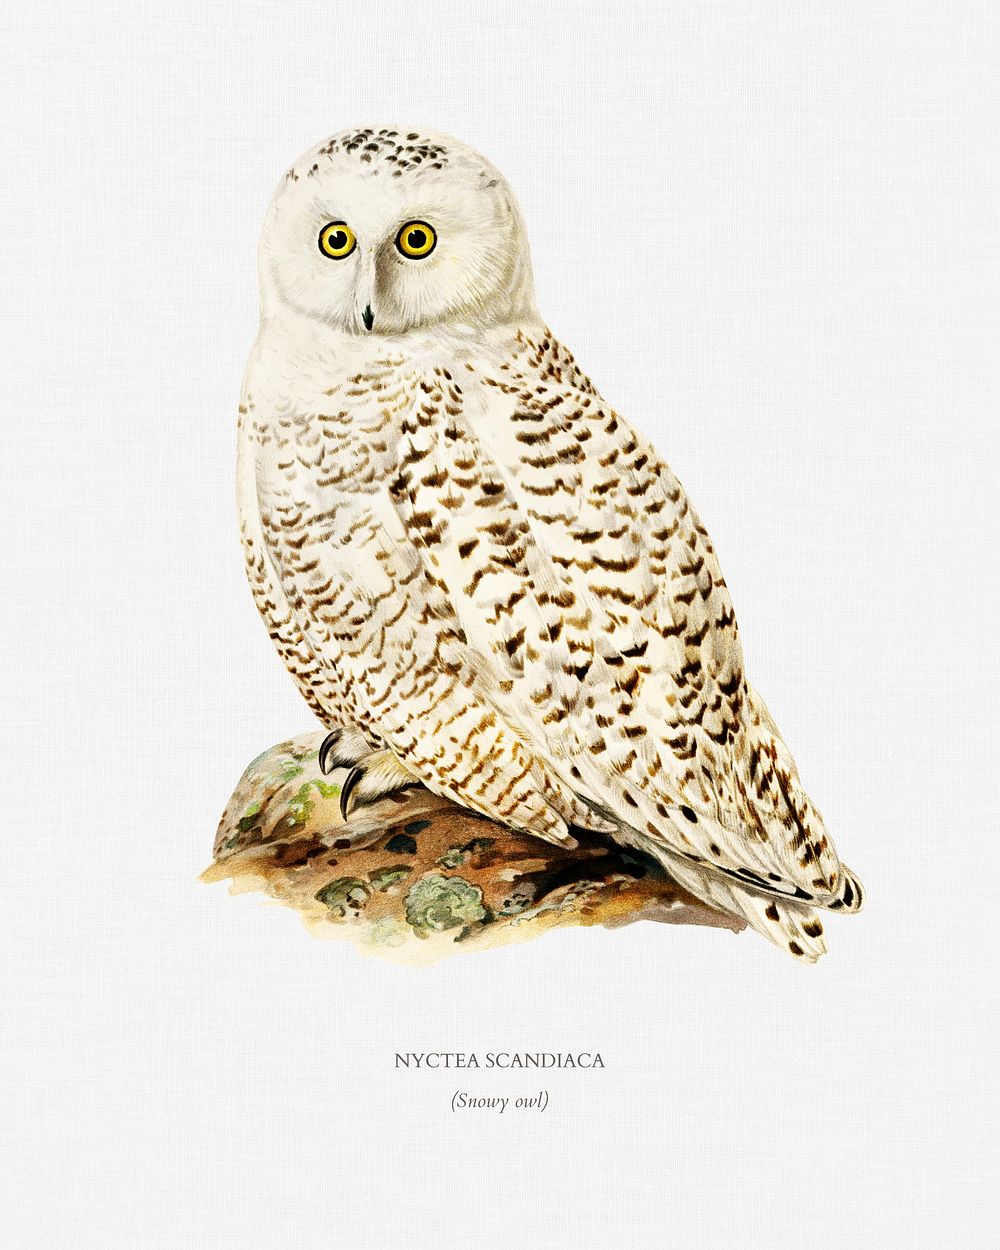 Snowy owl (Nyctea Scandiaca) illustrated by the von Wright brothers. Digitally enhanced from our own 1929 folio version of…